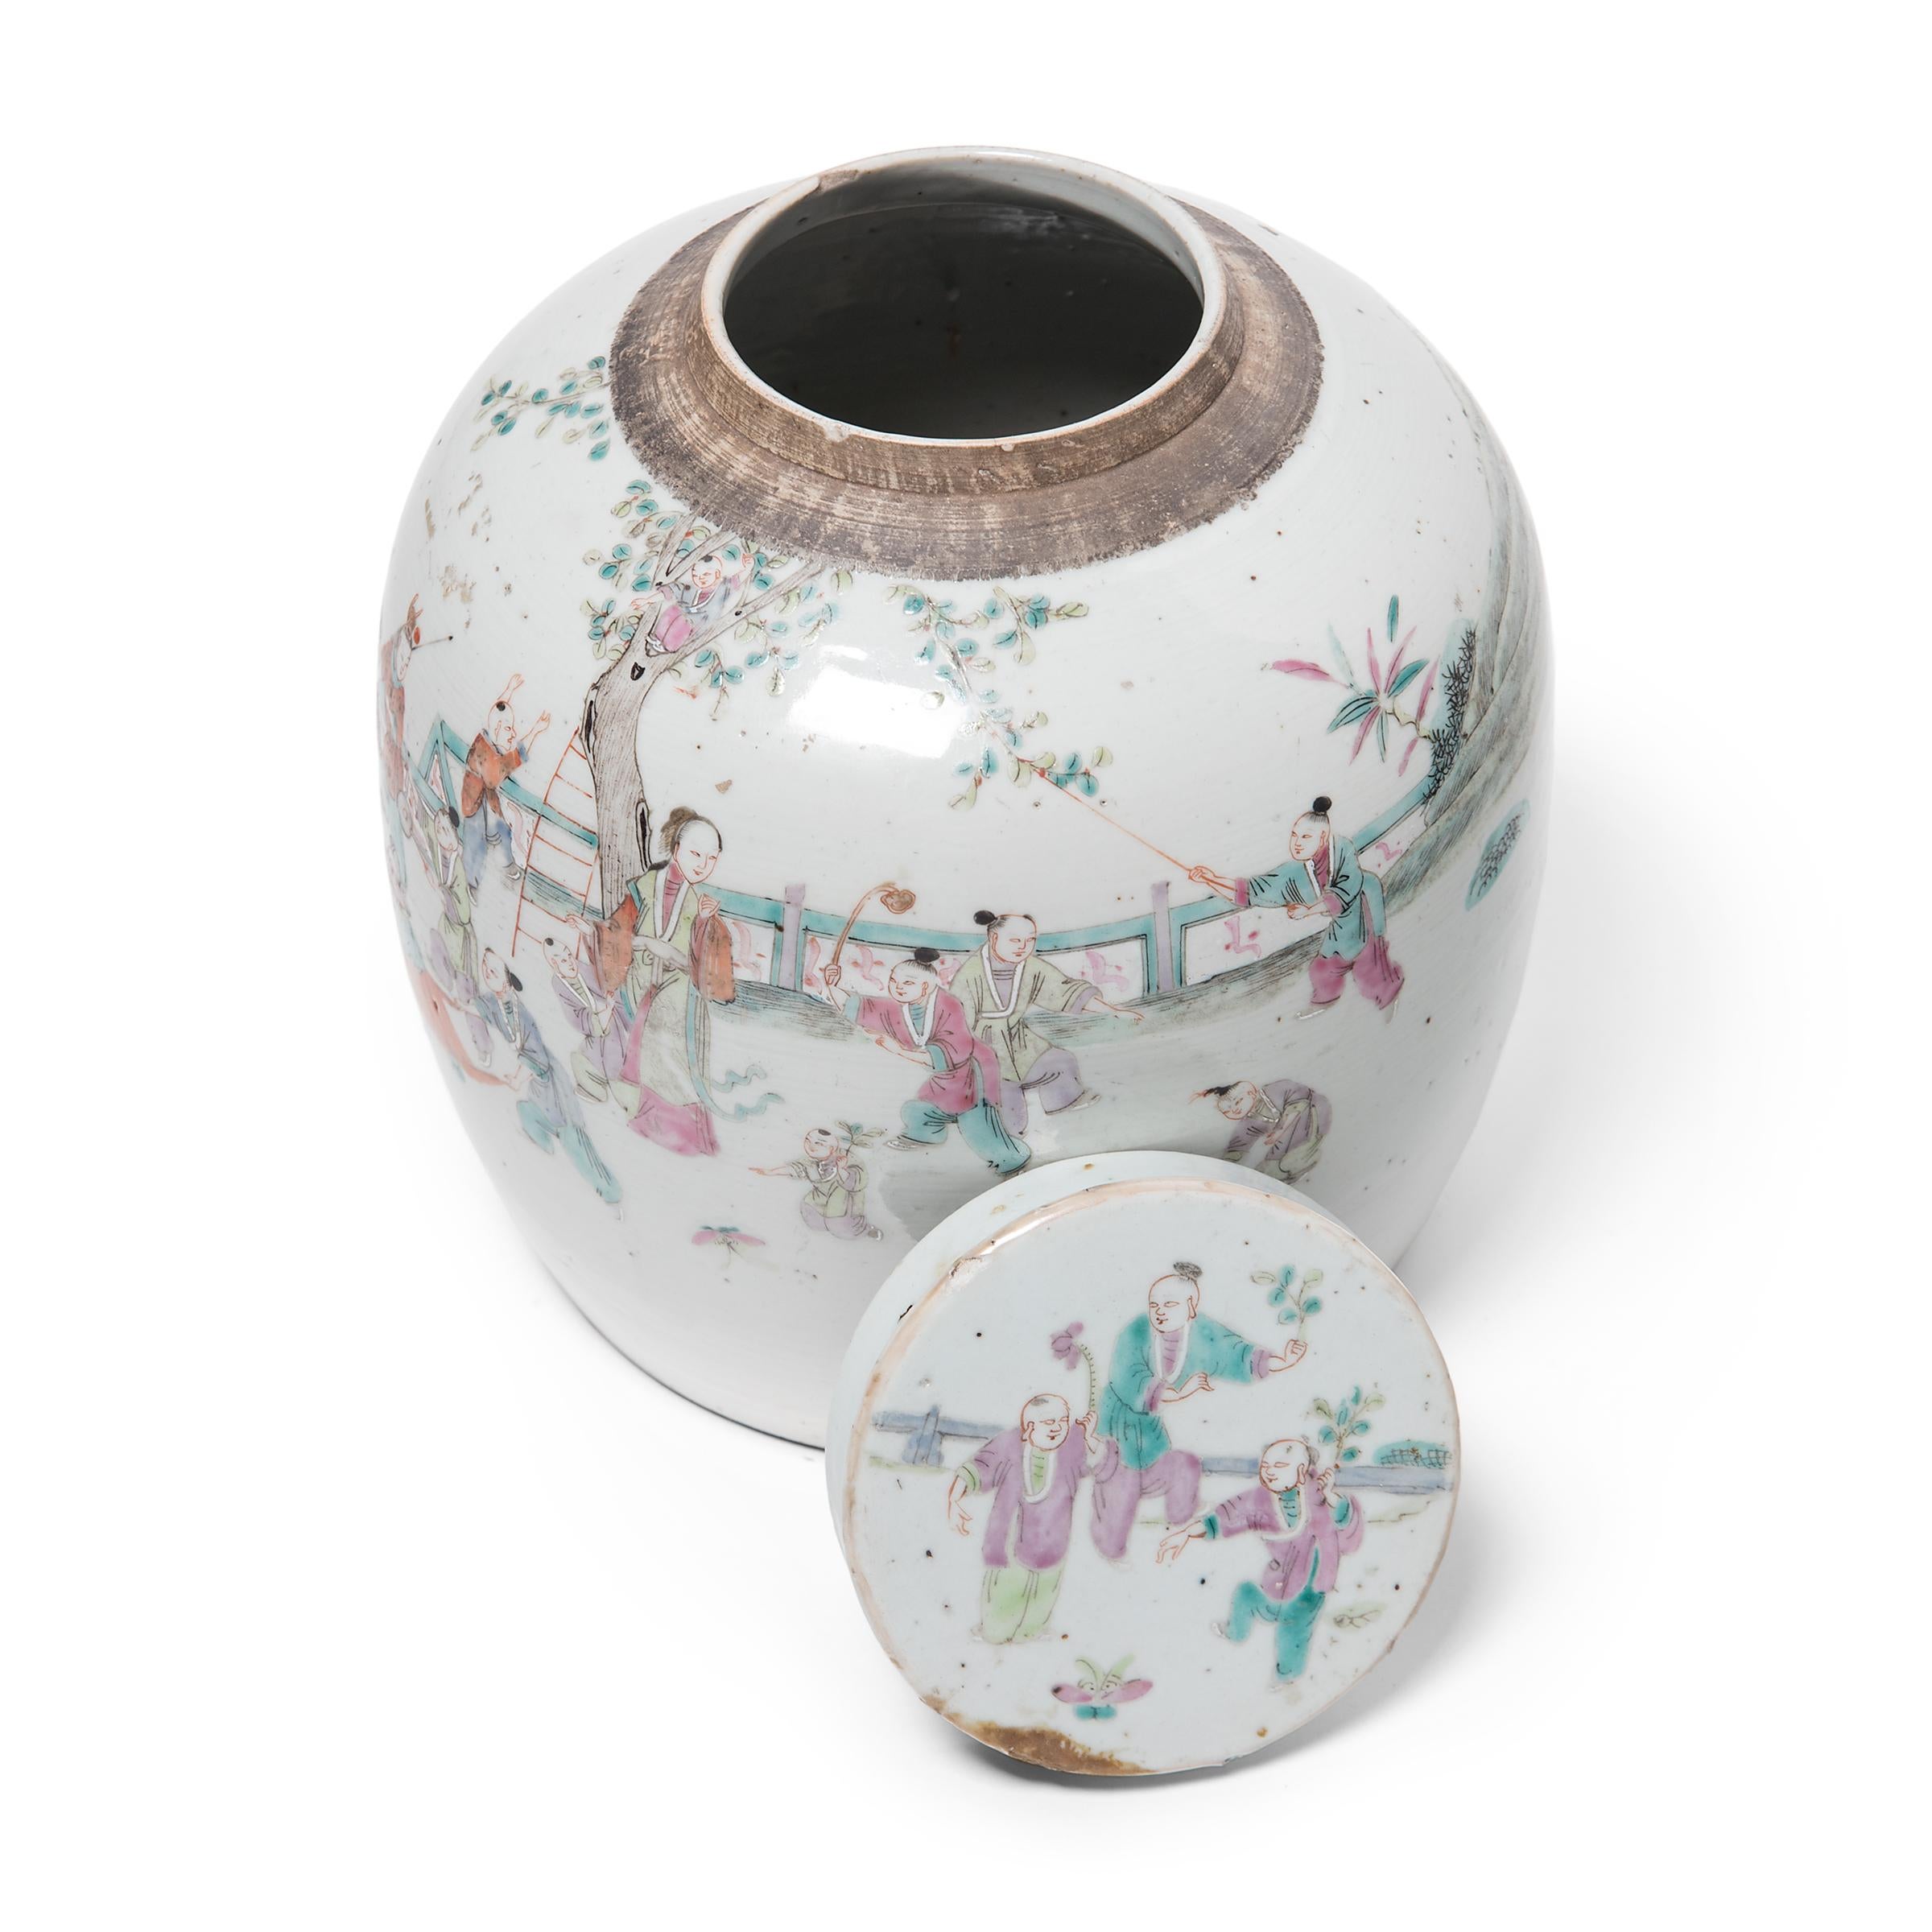 Porcelain Chinese Famille Rose Jar with Children Playing, c. 1900 For Sale